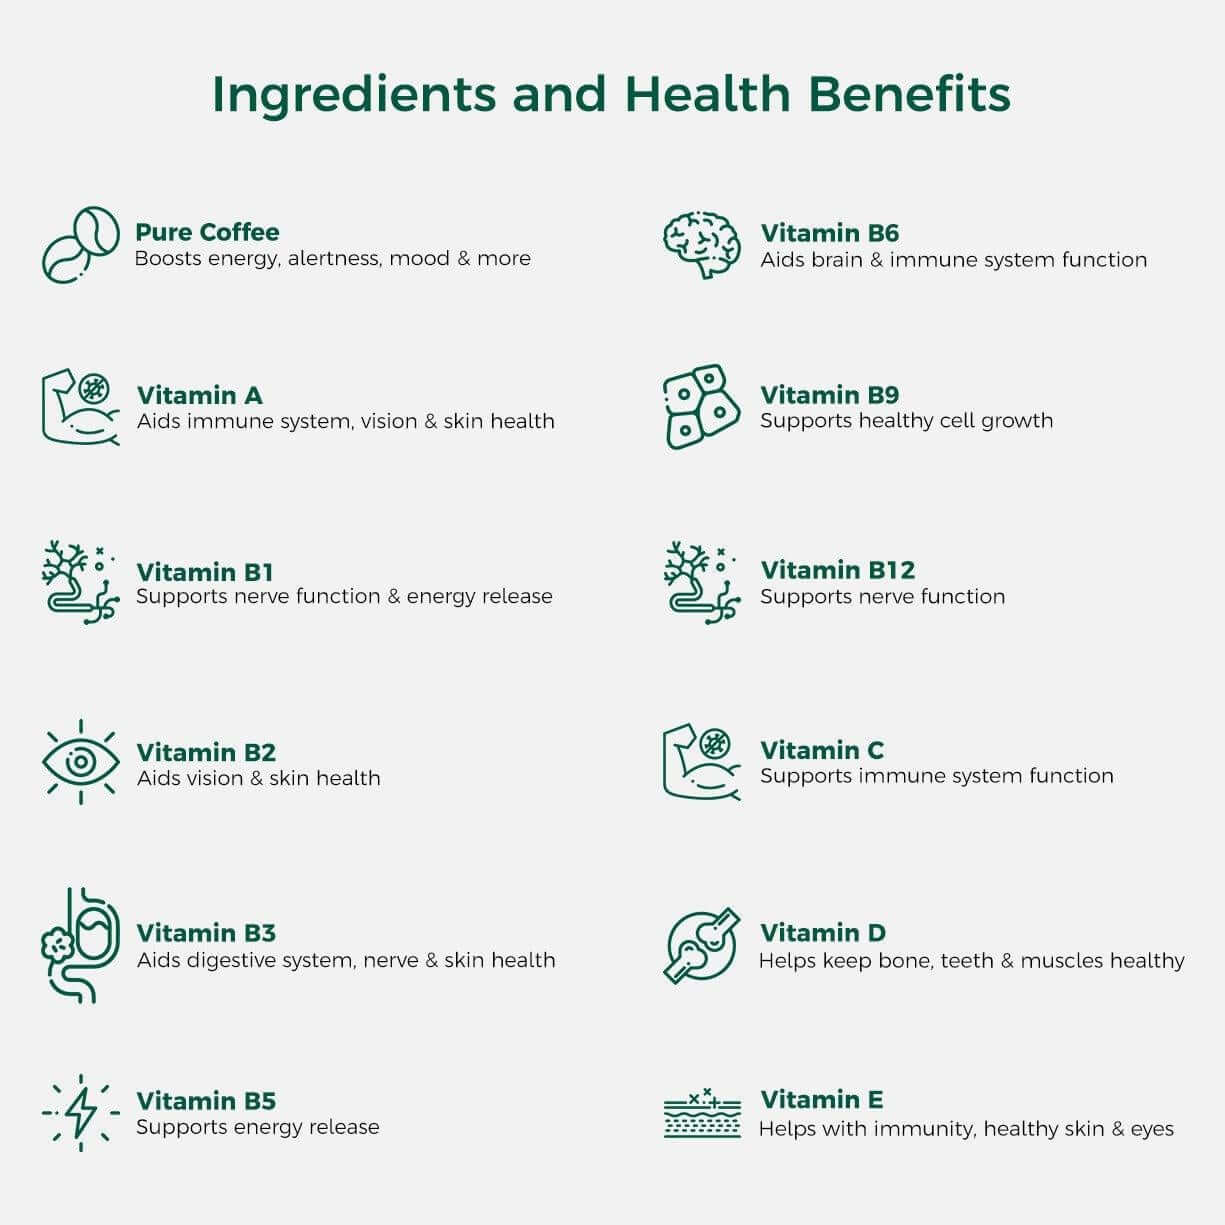 Ingredients and Health Benefits of IncredaBrew Instant Coffee